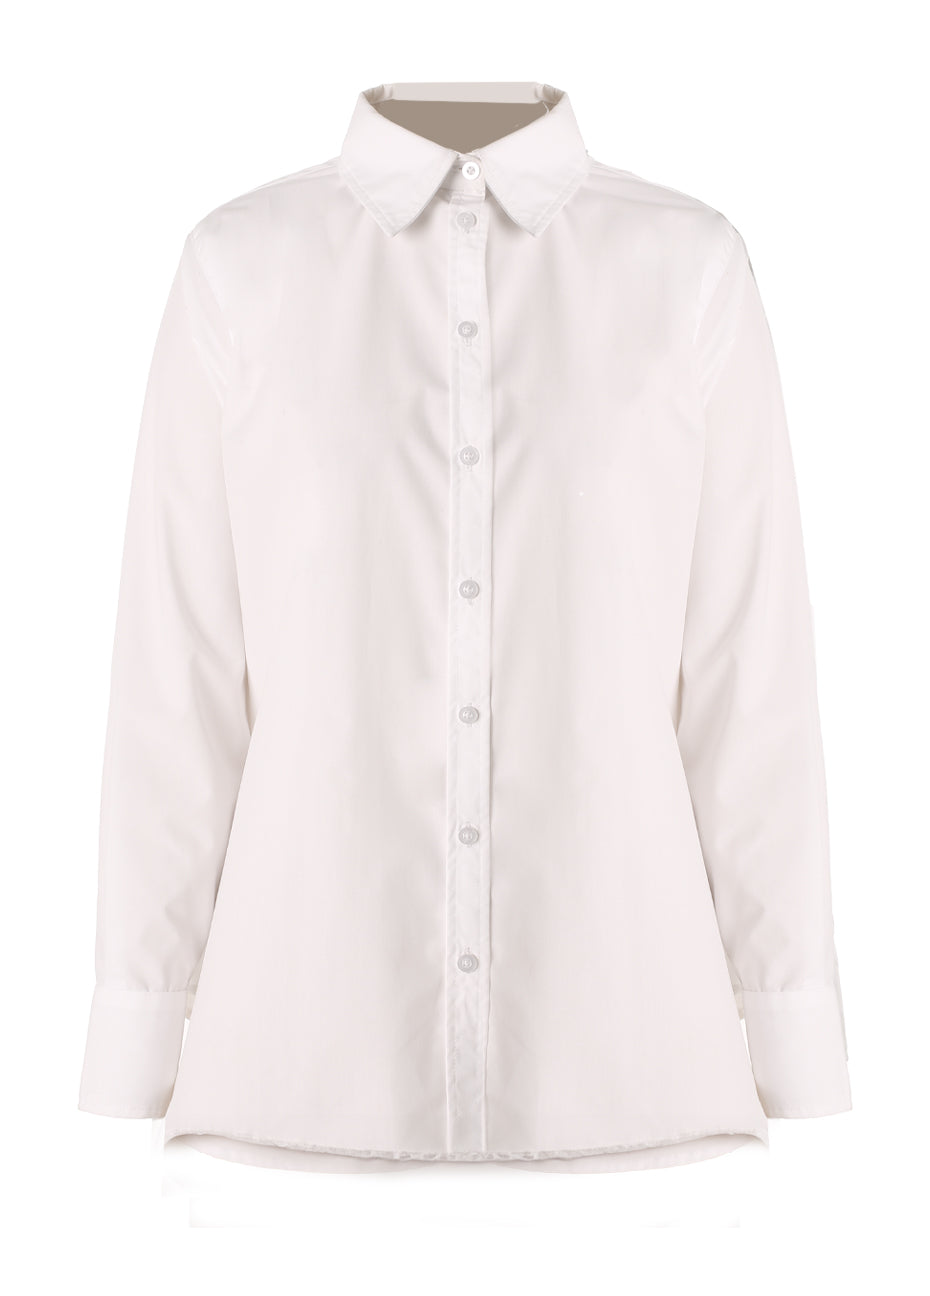 Relaxed Button Down Shirt - White